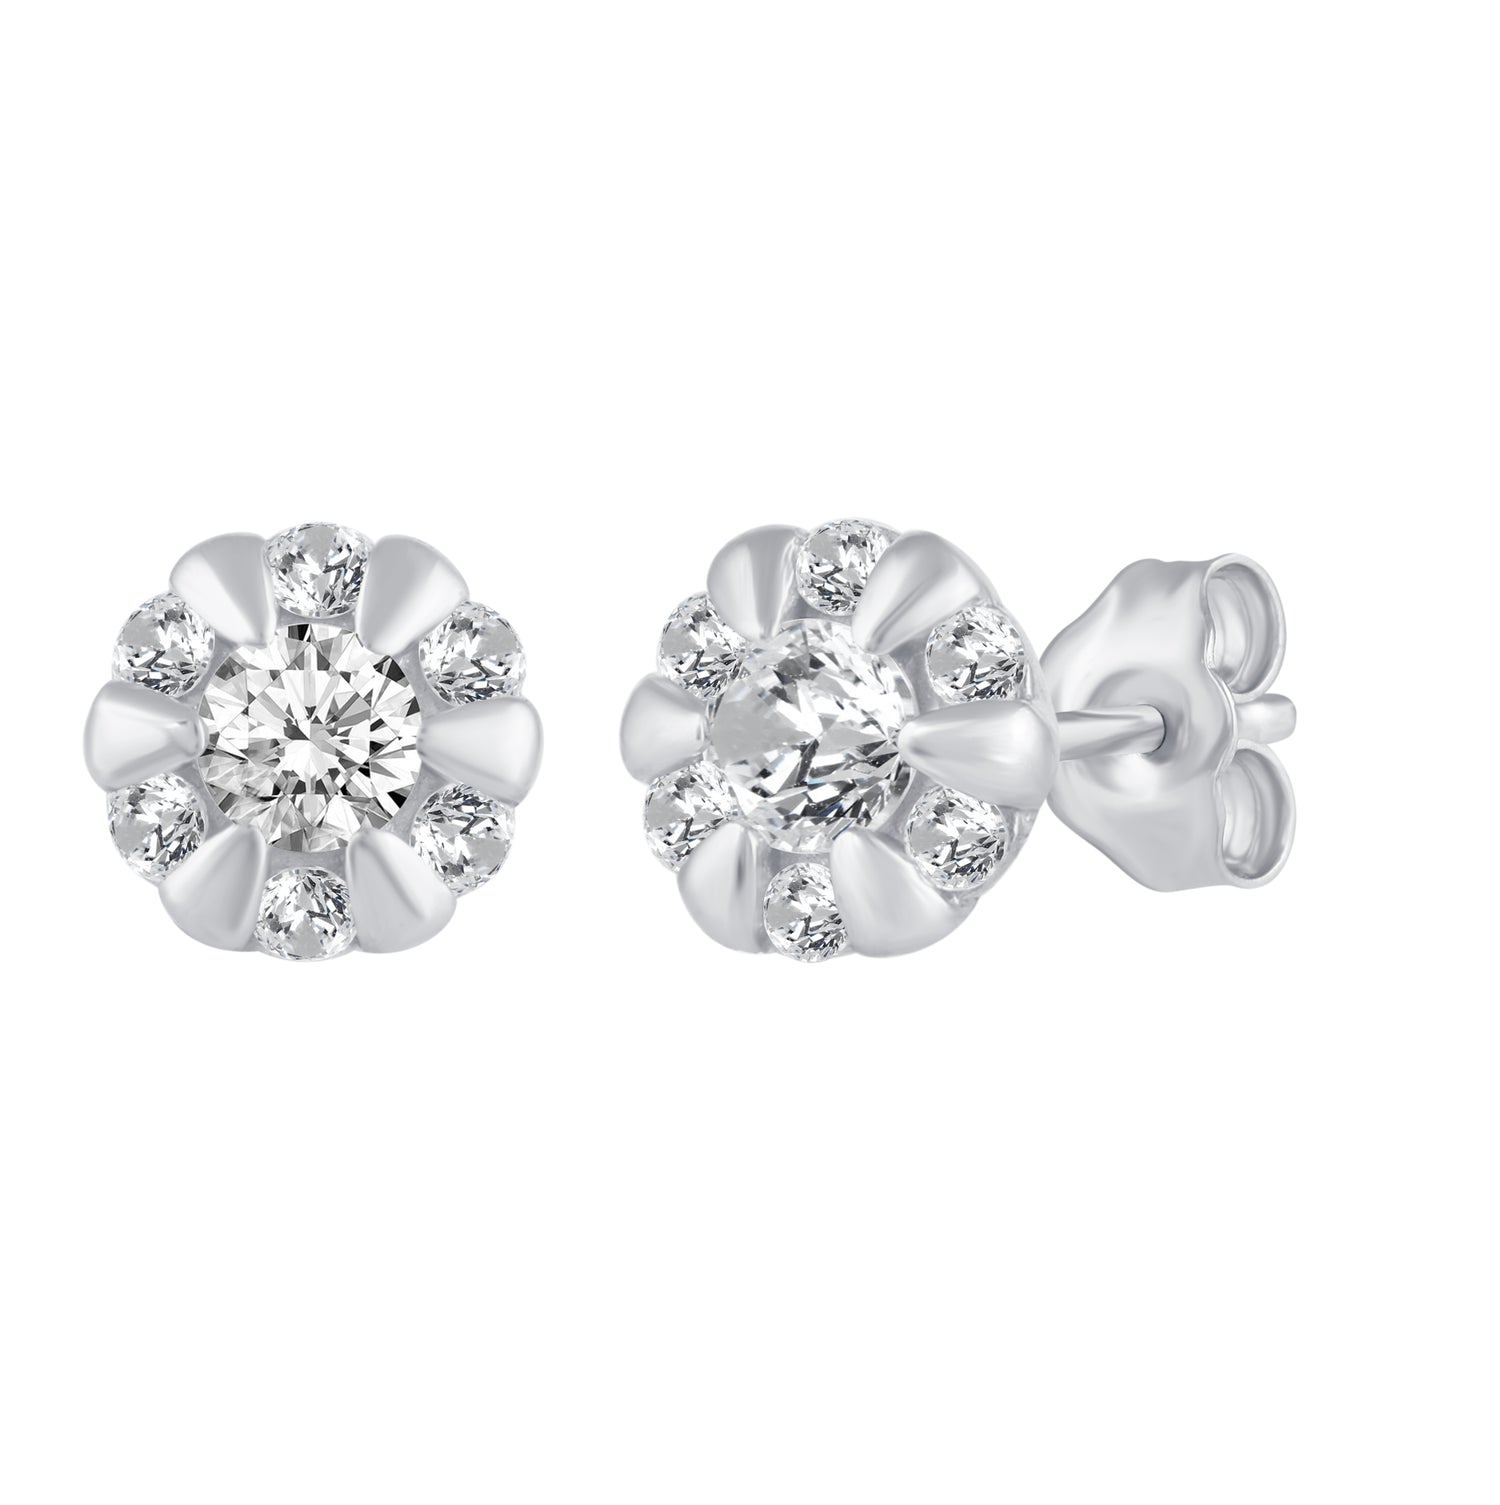 Floral Cluster Stud Earrings with 1/4 Ctw Natural Diamonds set in 925 Sterling Silver